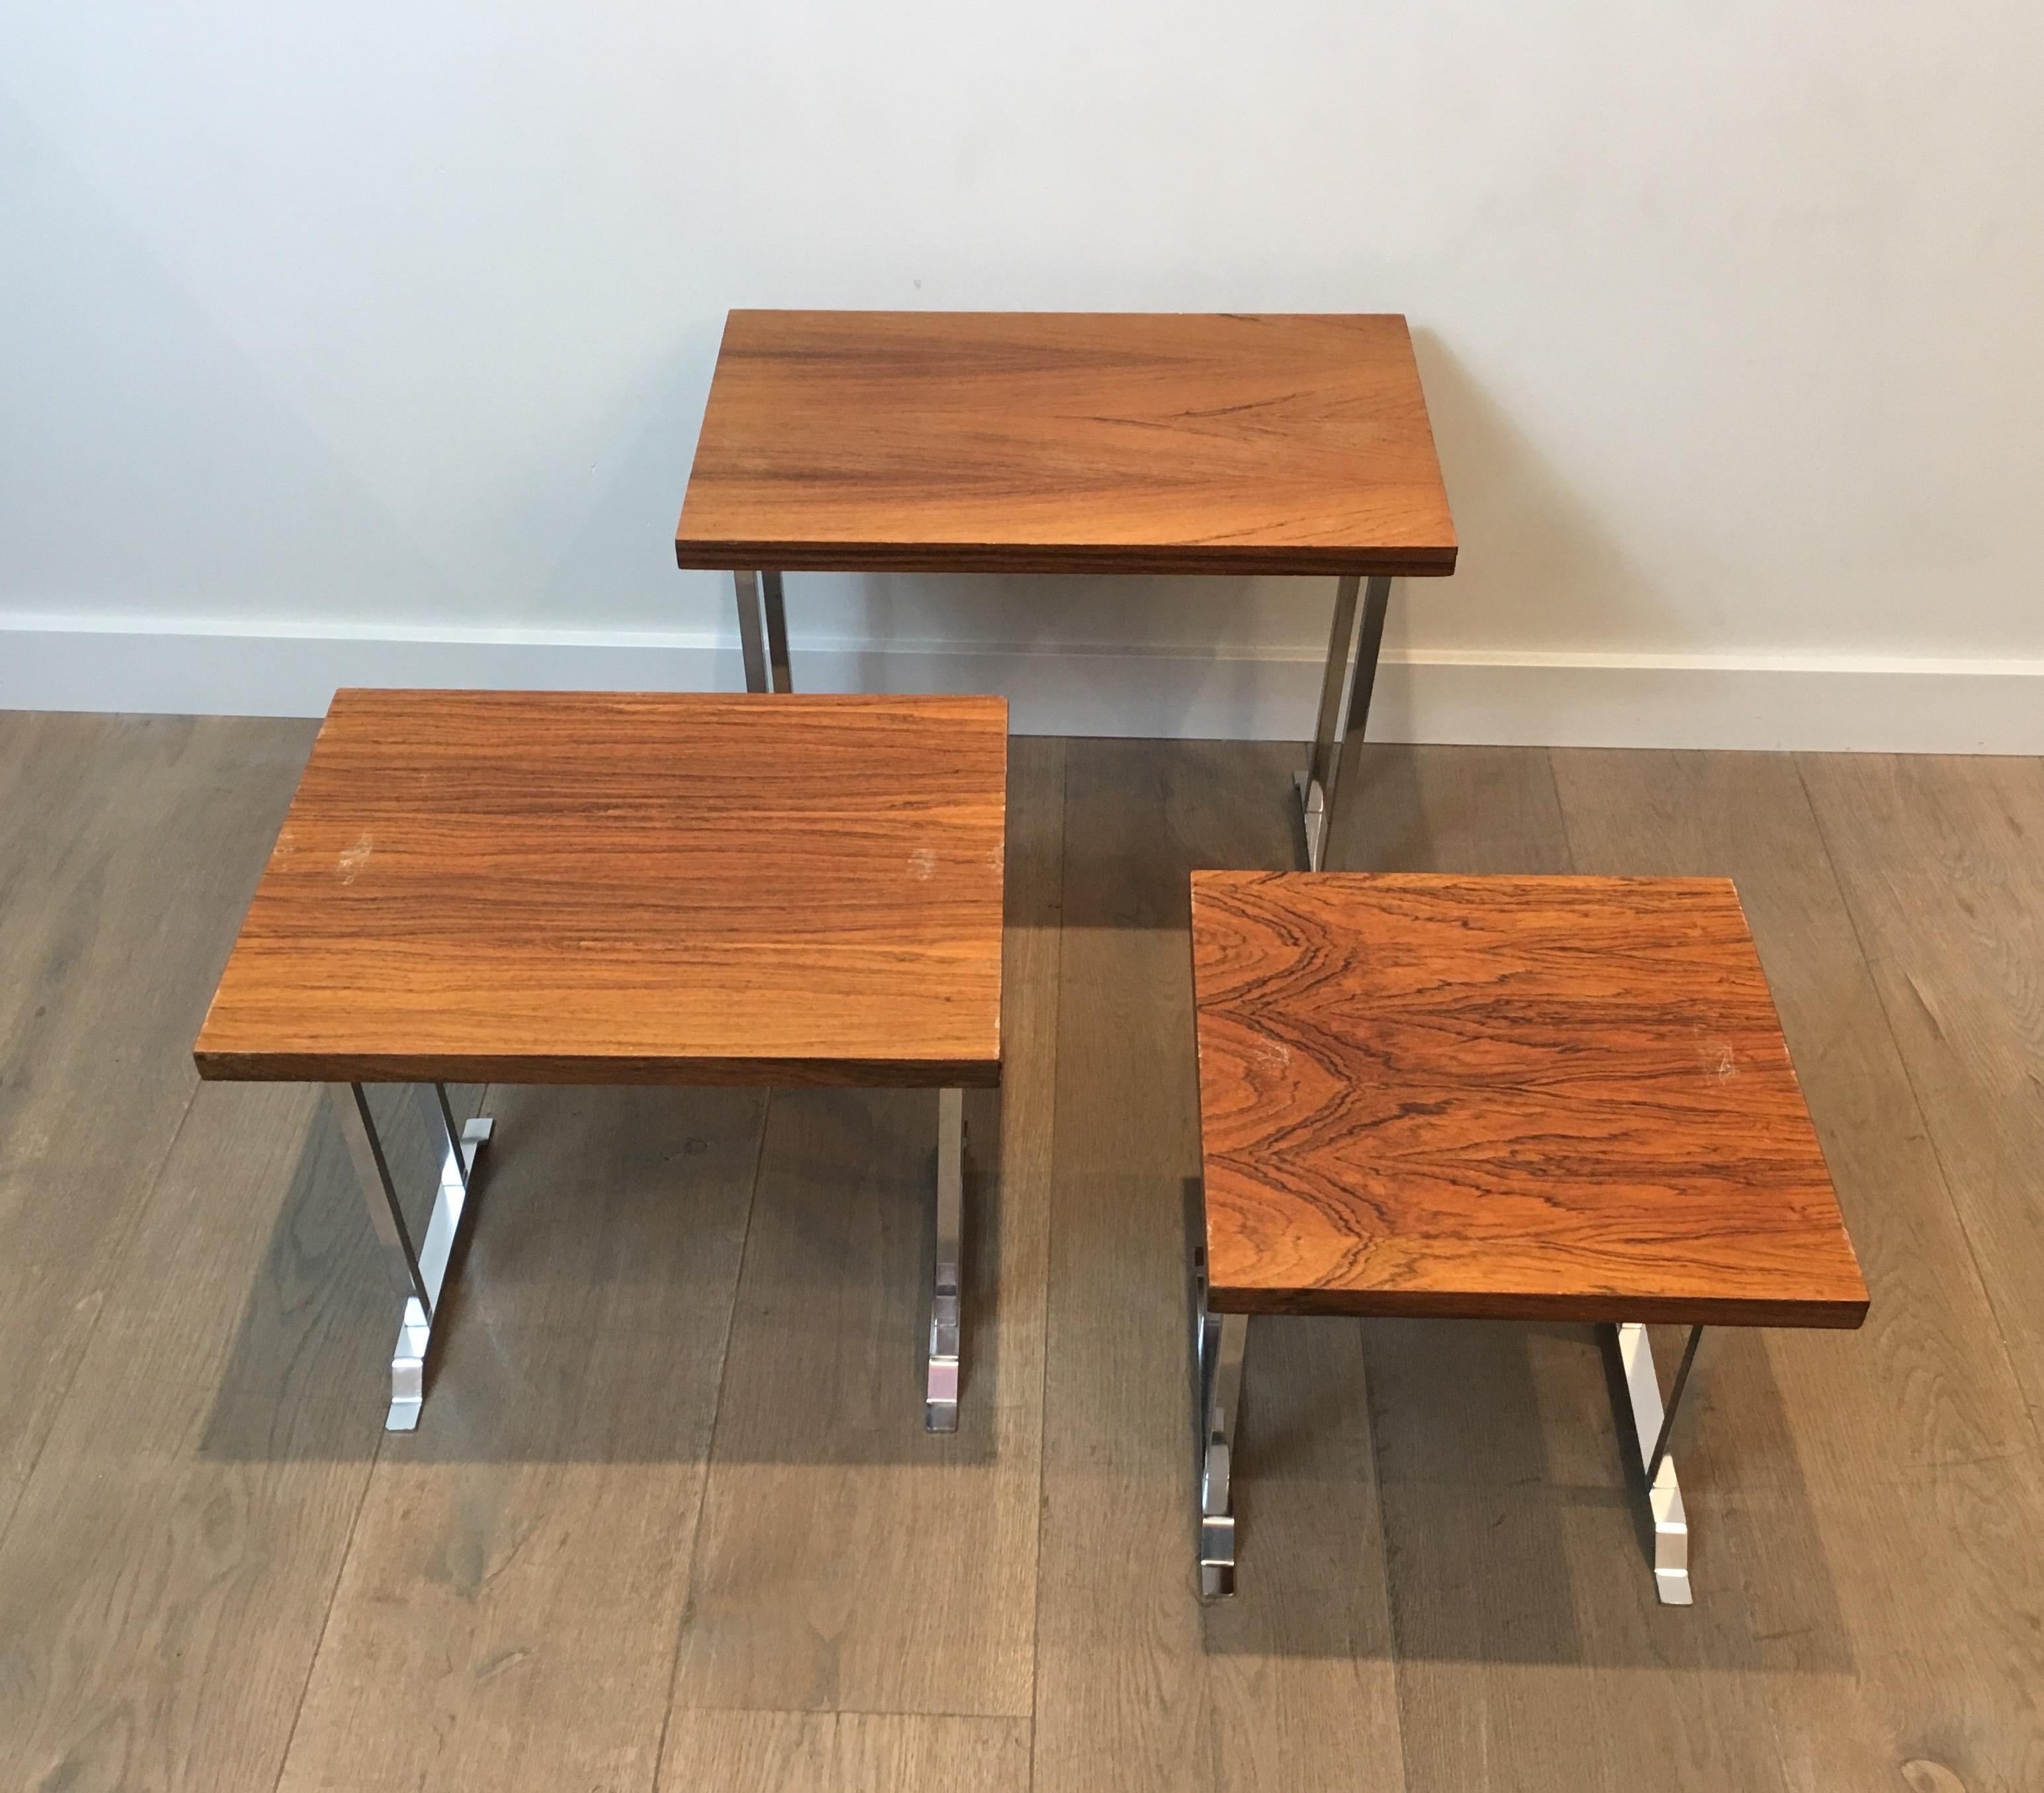 Set of 3 Exotic Wood and Chrome Nesting Tables, French, circa 1970 For Sale 9